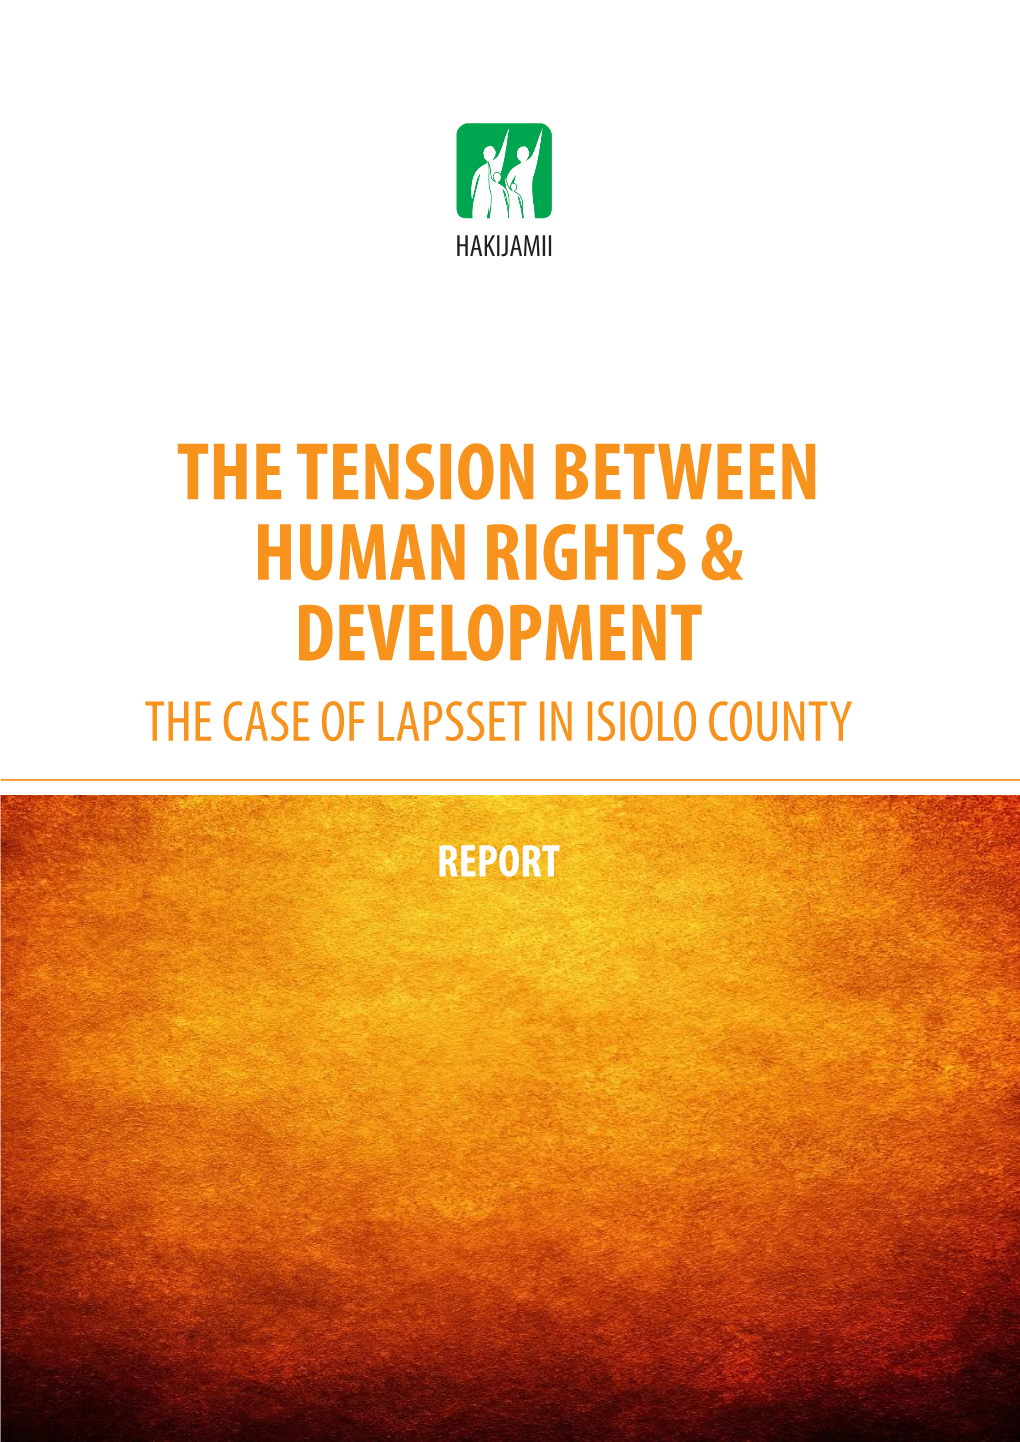 The Case of Lapsset in Isiolo County